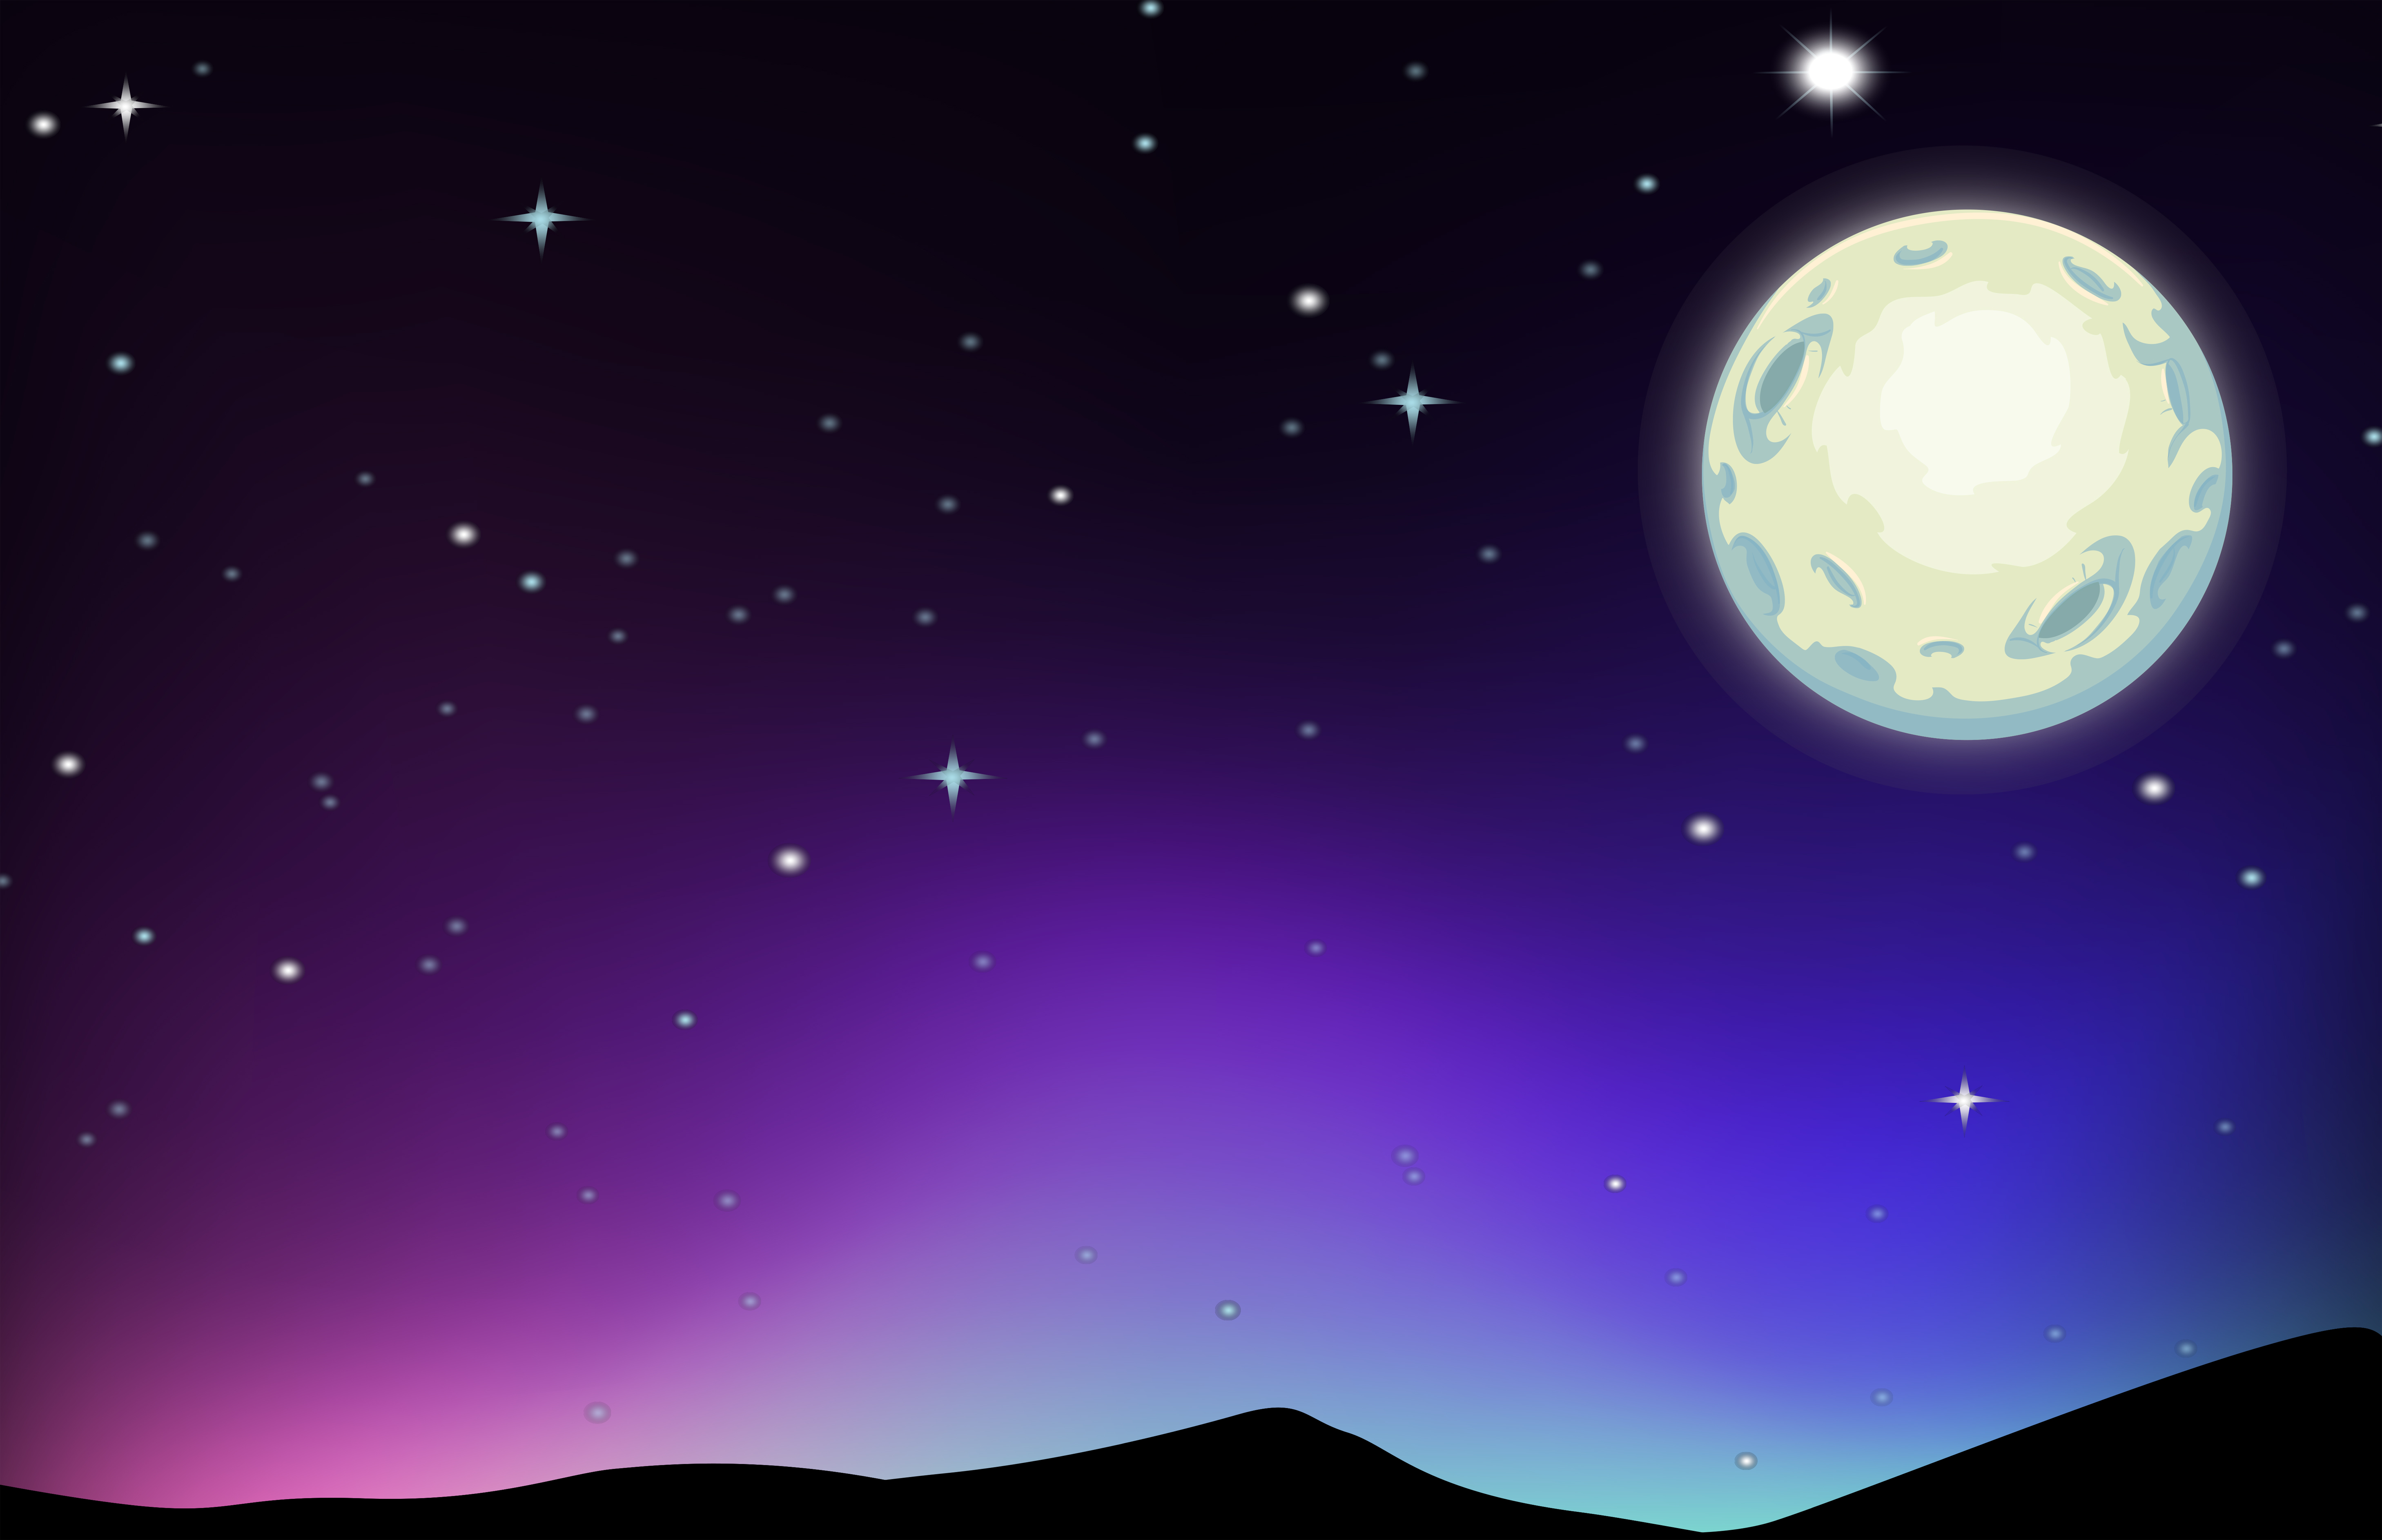 Night scene with moon and stars - Download Free Vectors, Clipart Graphics & Vector Art